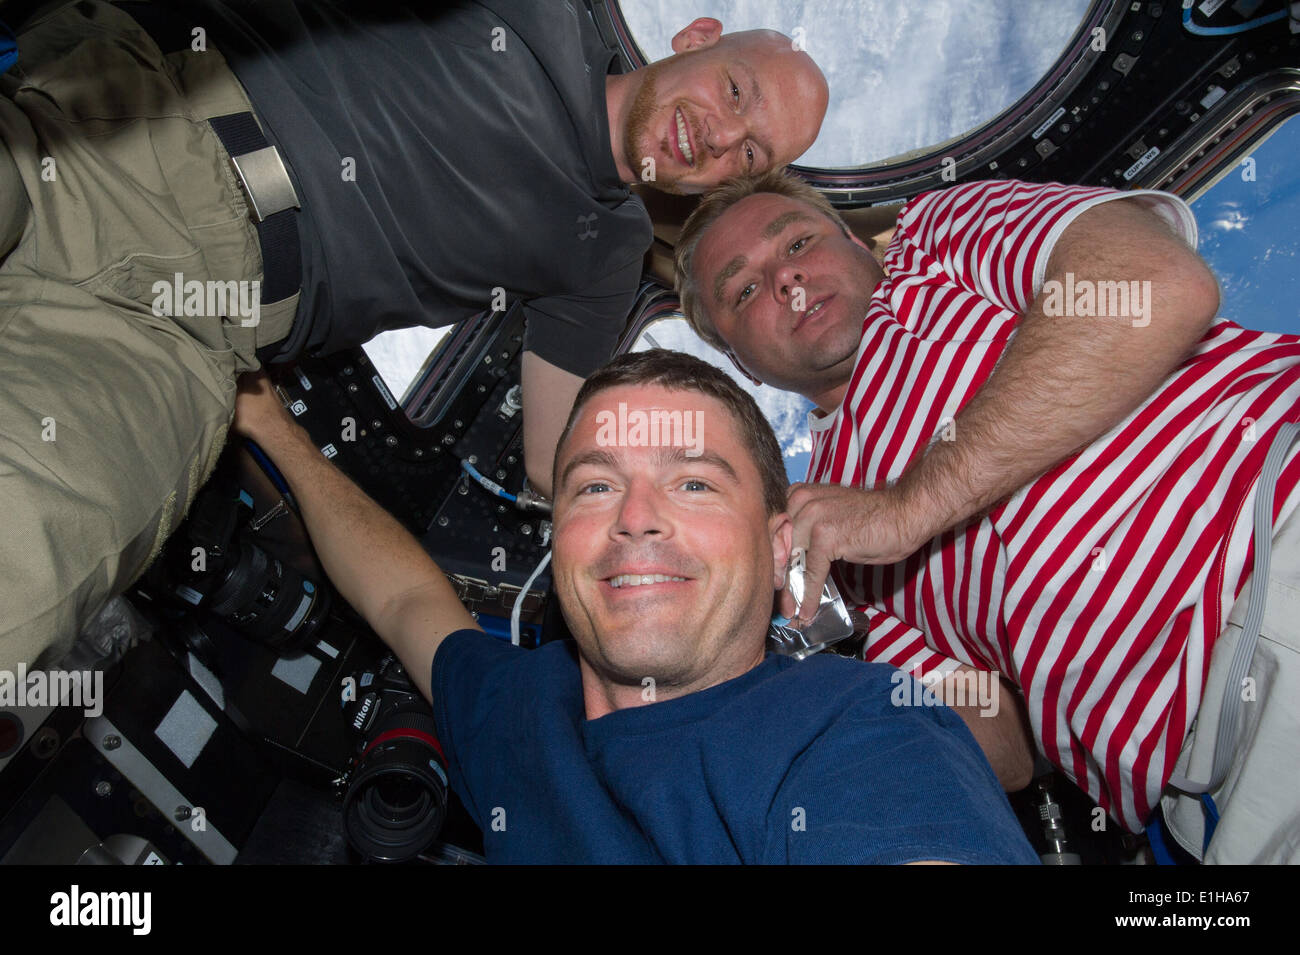 Newly arrived Expedition 40 crew members European Space Agency astronaut Alexander Gerst, left, NASA astronaut Reid Wiseman, center, and Russian cosmonaut Maxim Suraev pose for a photo in the Cupola of the International Space Station June 2, 2014 in Earth Orbit. Stock Photo